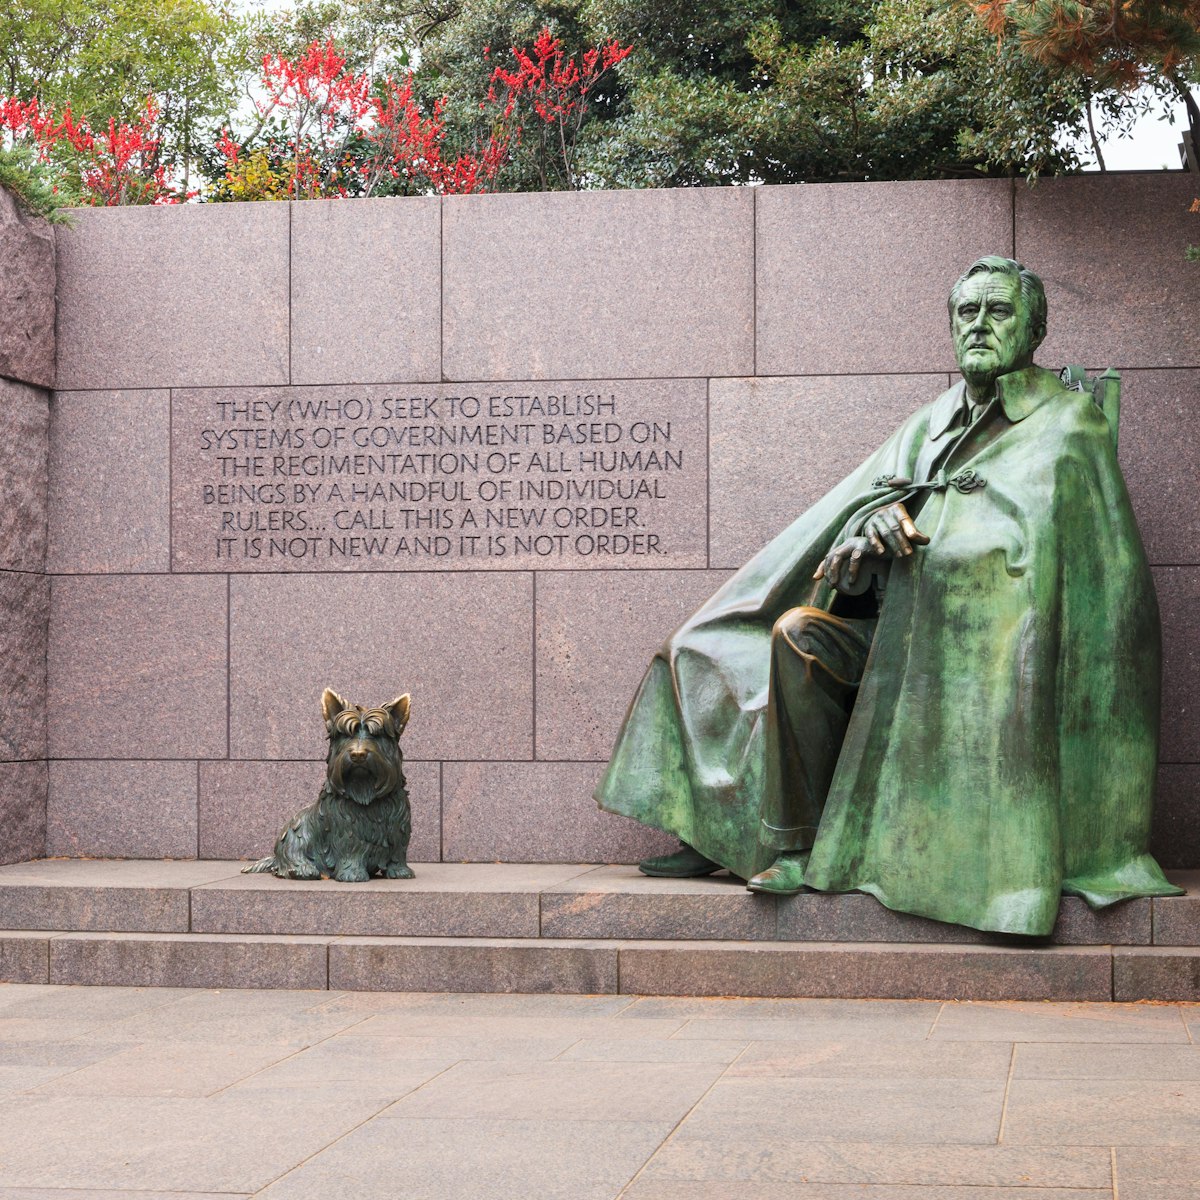 WASHINGTON, DC - NOVEMBER 16, 2014:  The statue of Franklin Delano Roosevelt and his dog on the National Mall in autumn is a major tourist attraction.